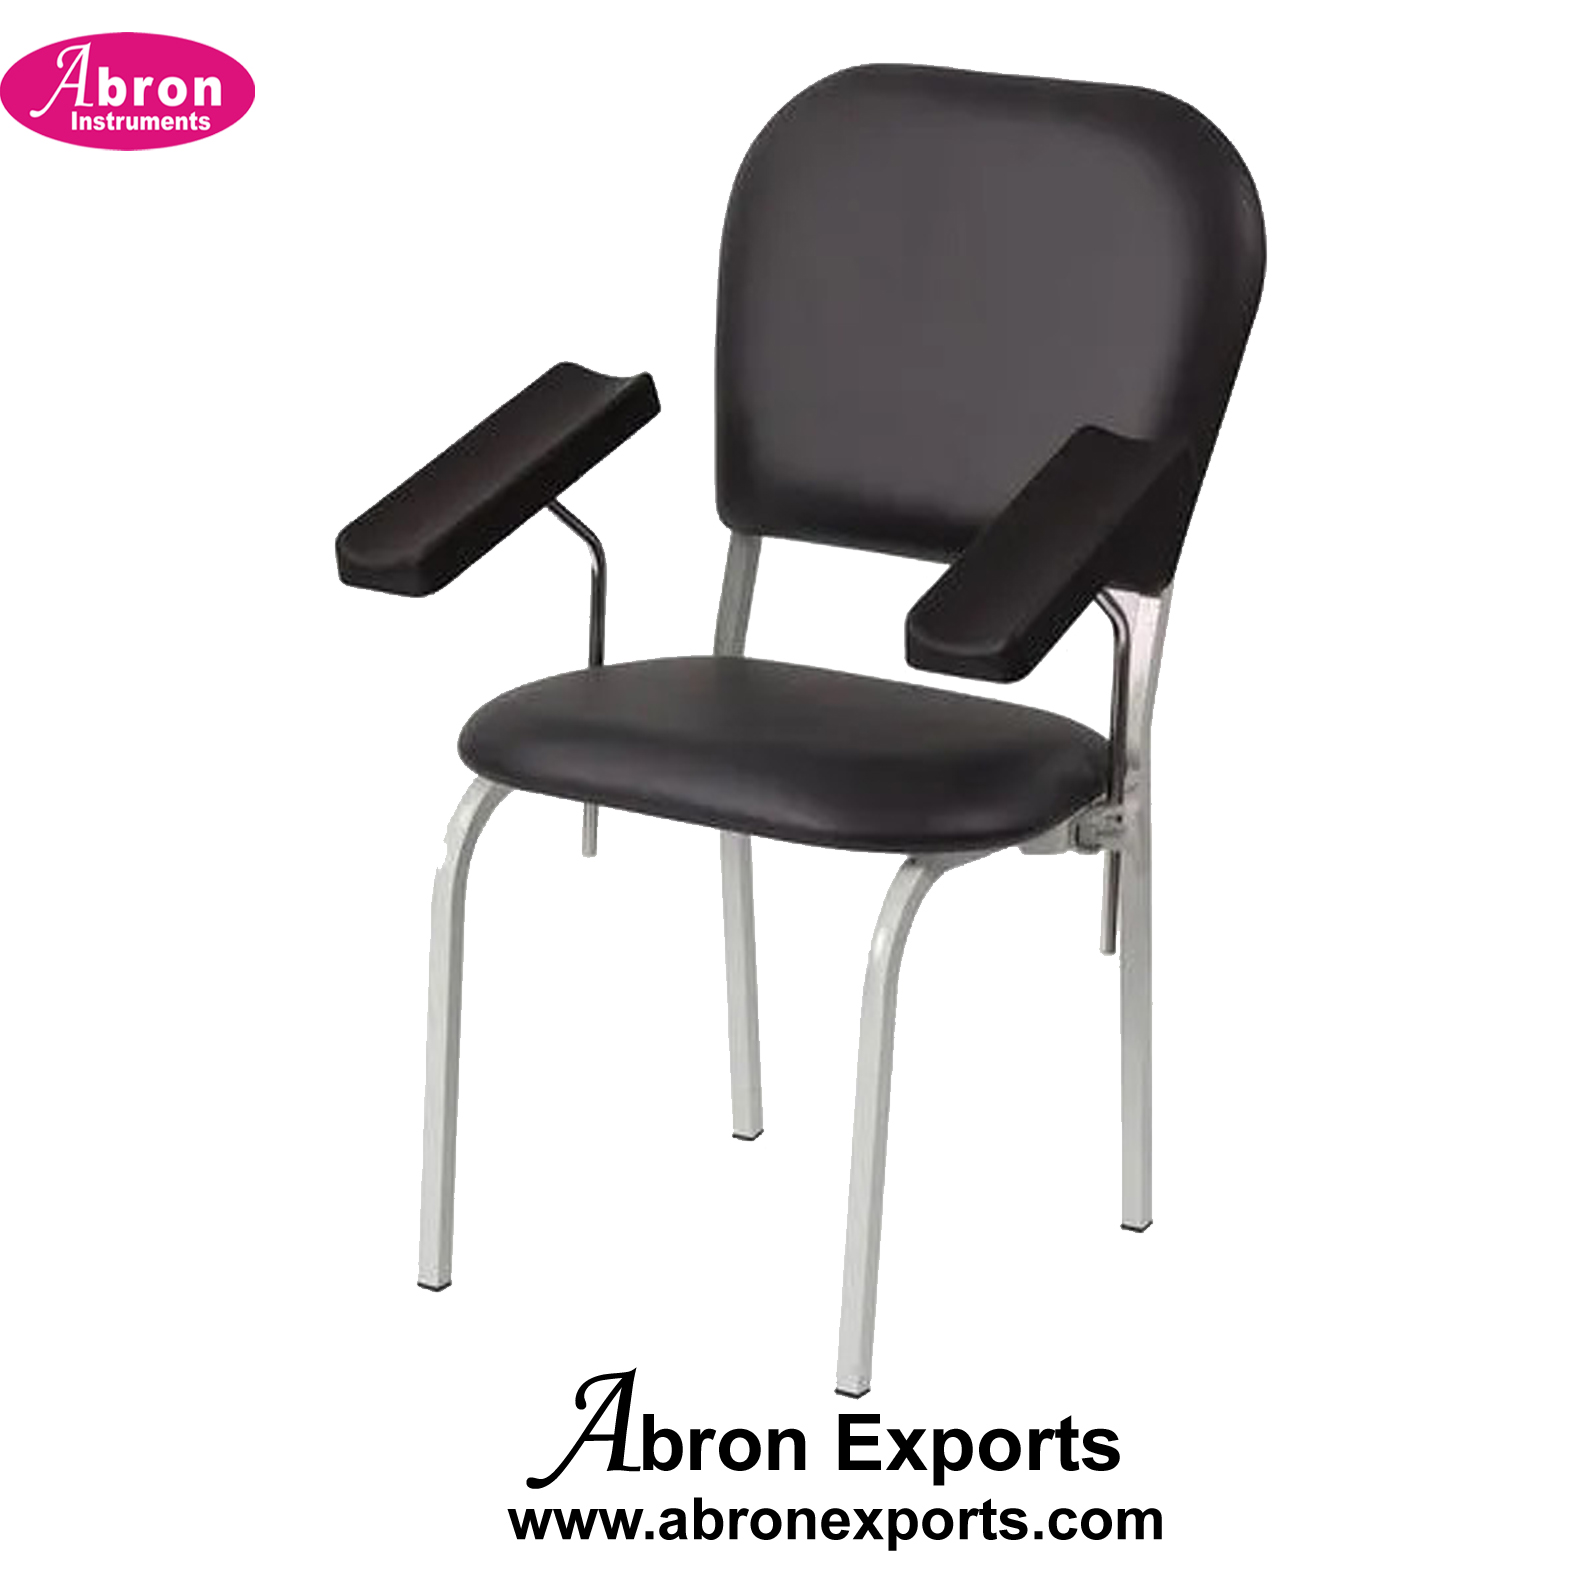 Hospital Blood Bank collection chair Surgical Medical Nursing Home Abron ABM-2275BCH 